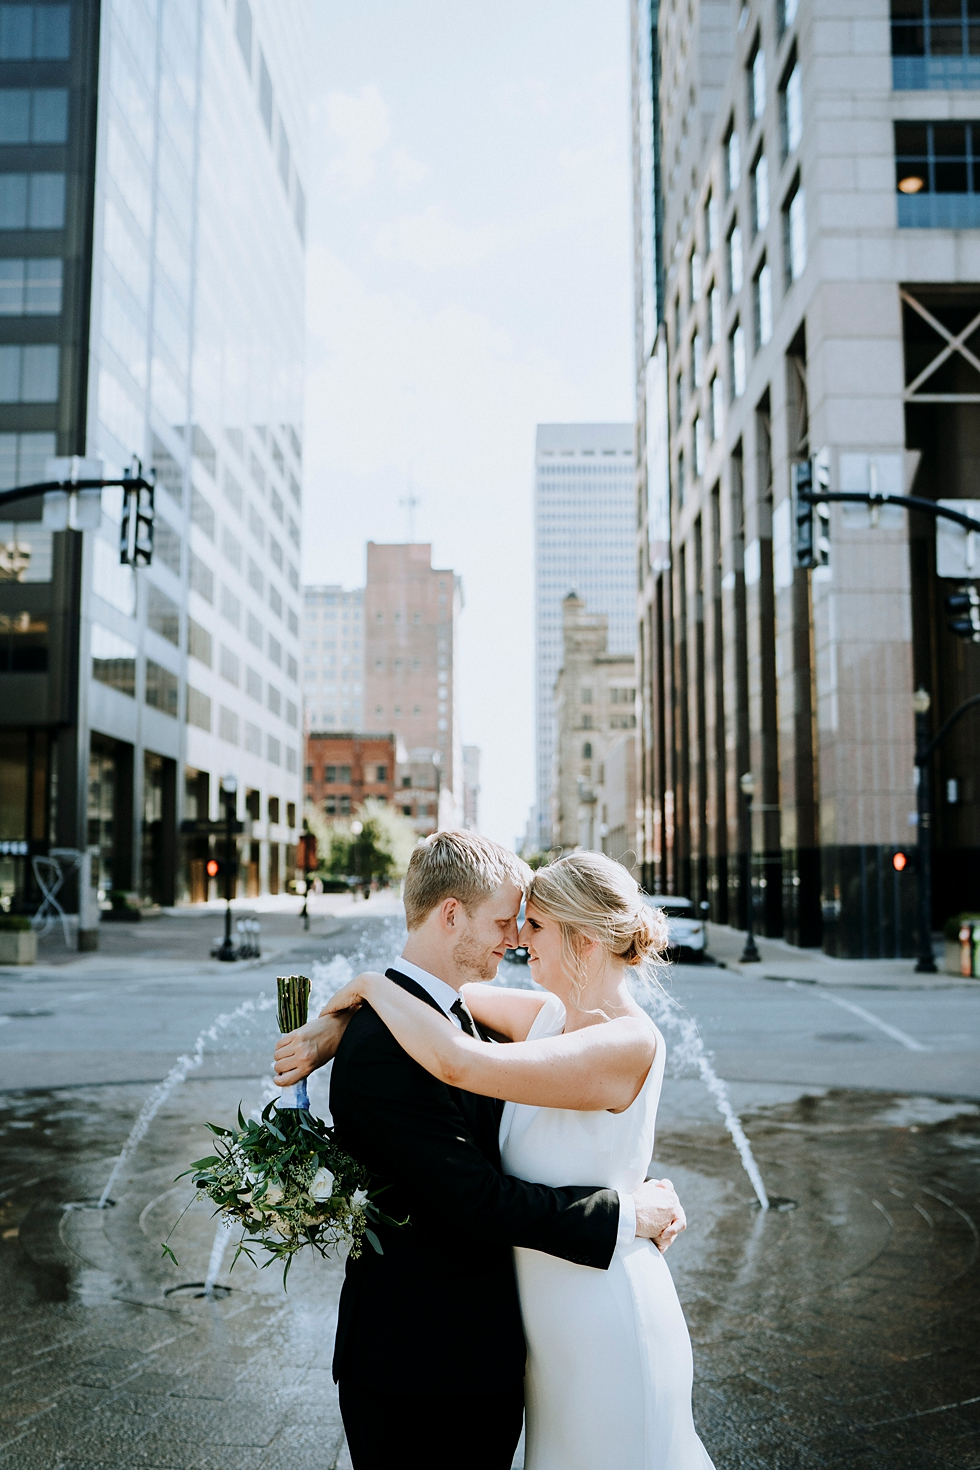  This is one of my favorite downtown wedding shots with the bride and groom! #weddinggoals #weddingphotographer #married #ceremonyandreception #kentuckyphotographer #indianaphotographer #louisvillephotographer #weddingphotos #husbandandwife #rooftopc